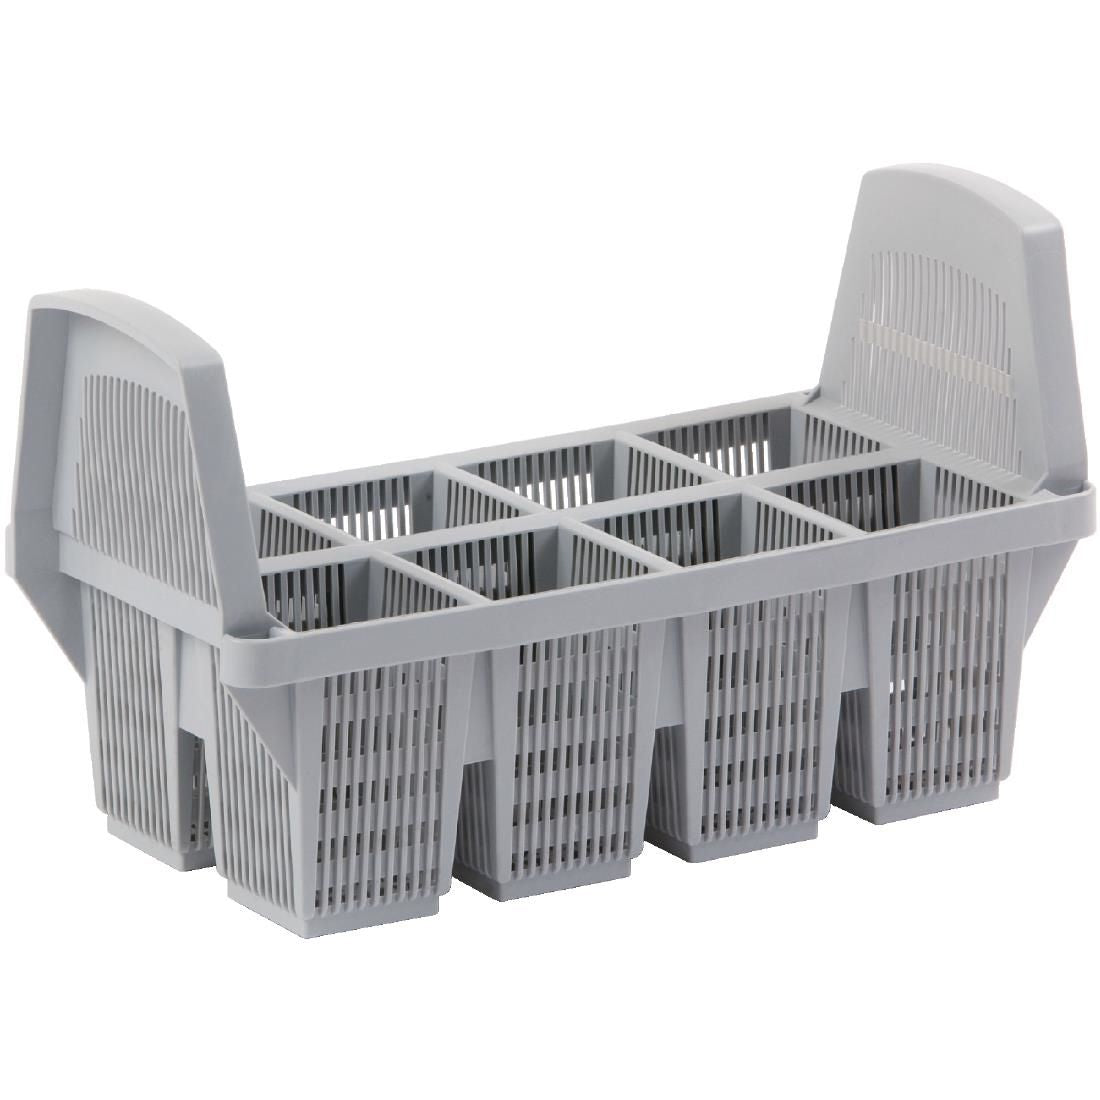 Classeq Ware Washer Cutlery Basket JD Catering Equipment Solutions Ltd